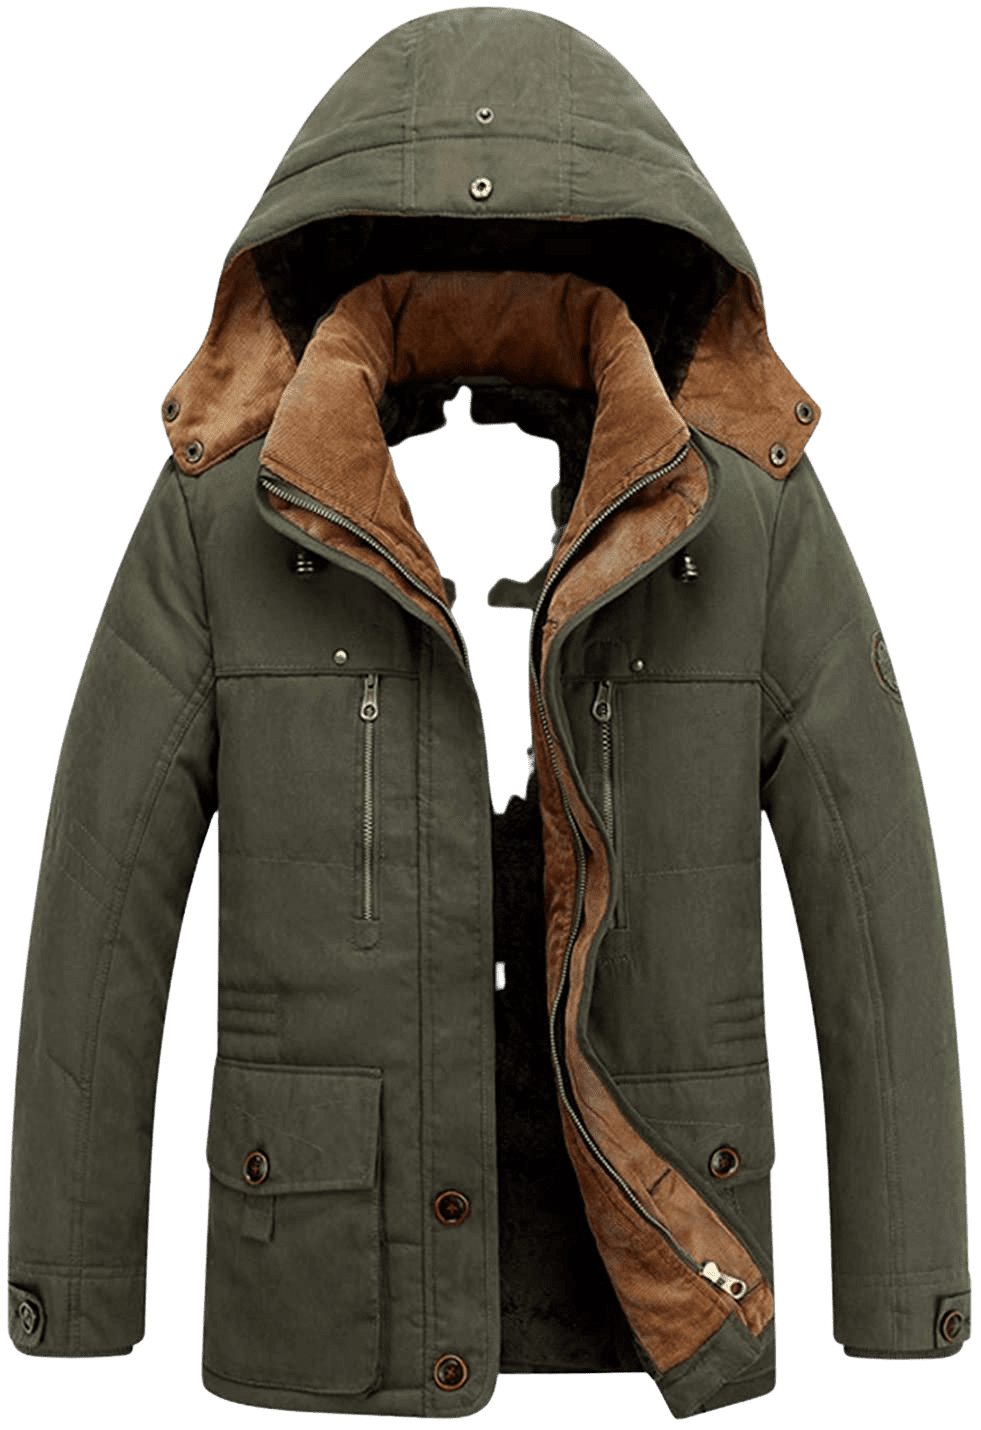 Lentta Men's Casual Winter Warm Thick Hooded Heavy Fleece Lined Parka Jacket Coat - Home Decor Gifts and More